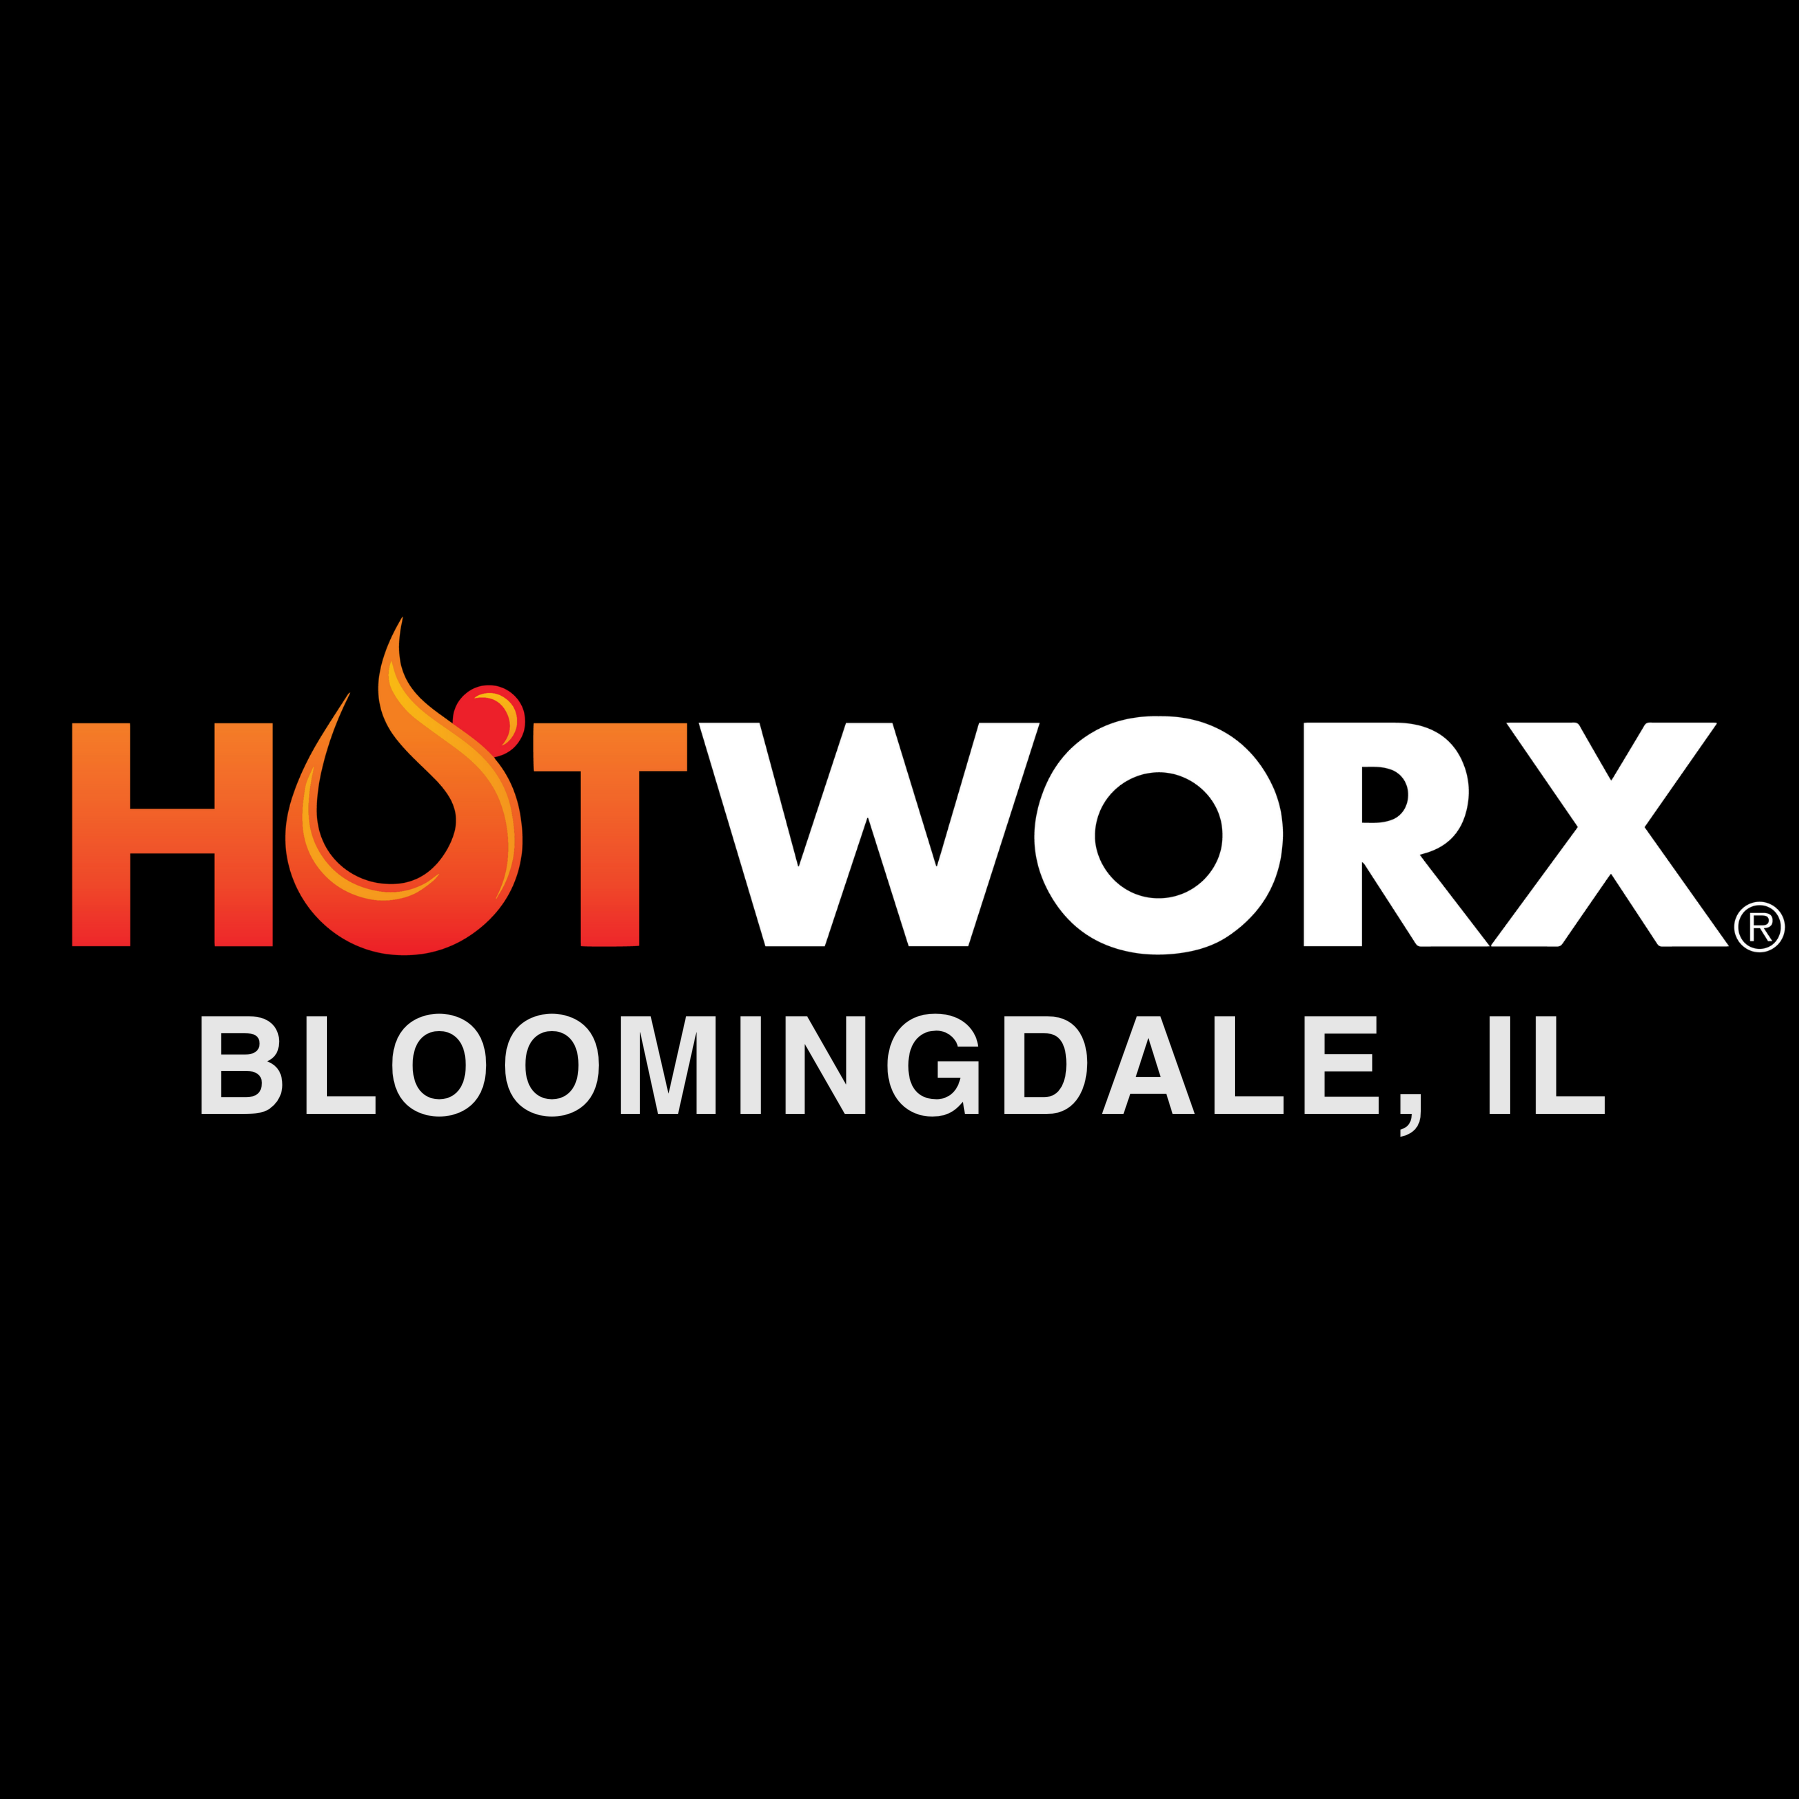 HOTWORX - Bloomingdale, IL's Logo